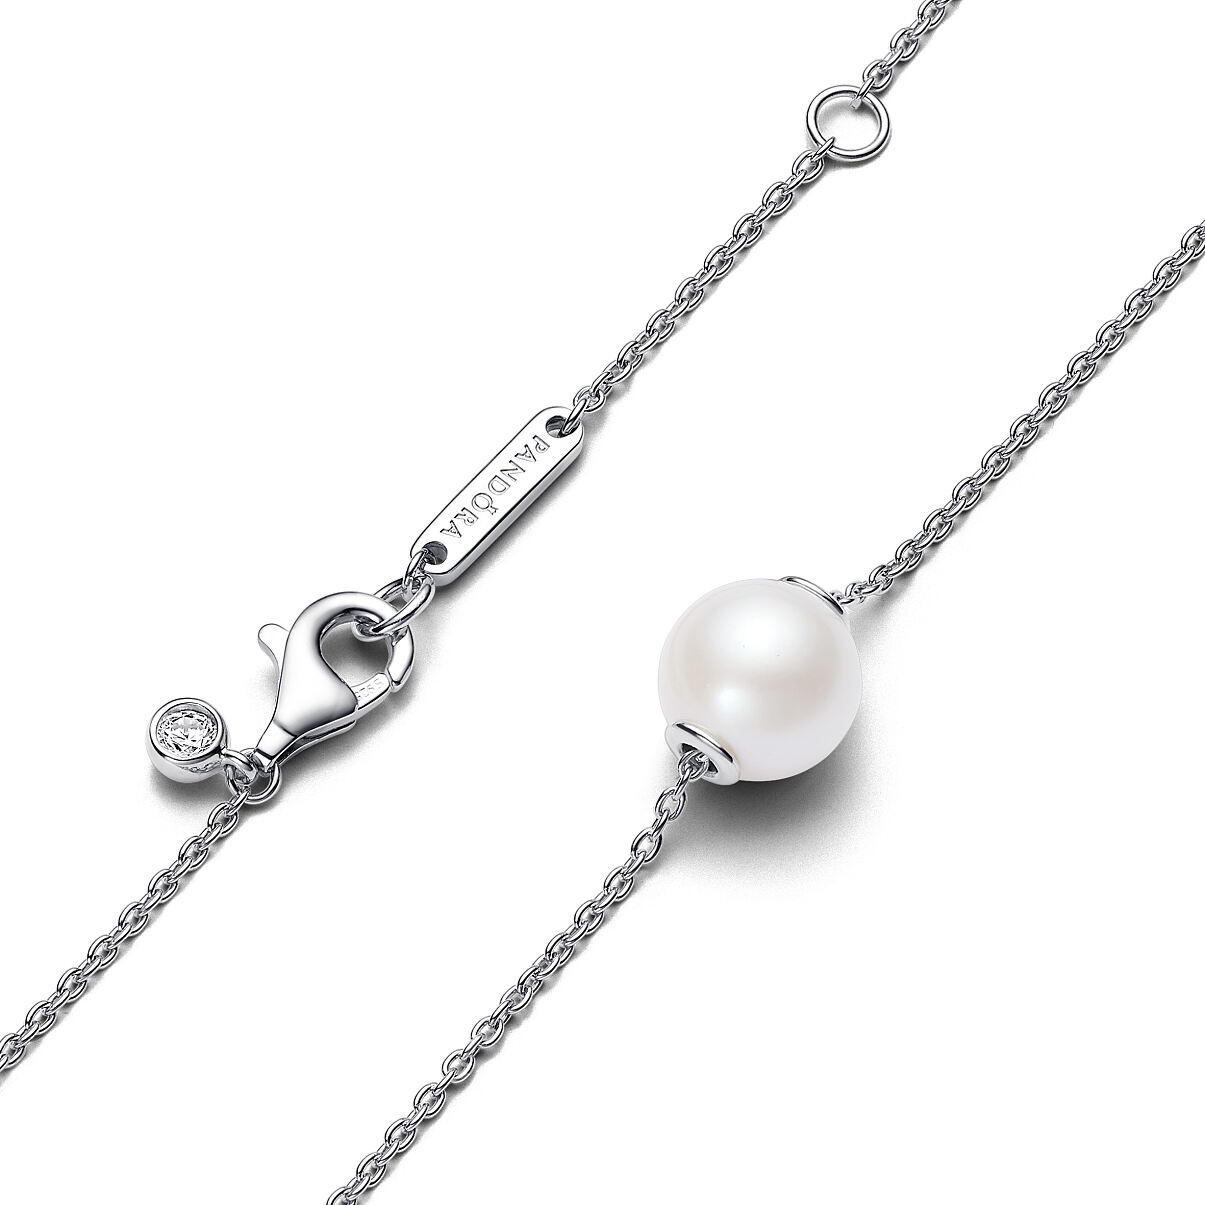 Pandora_Necklace_Sterling Silver_Freshwater Pearls_Cubic Zirconia_393167C01_119,00 Euro (3)